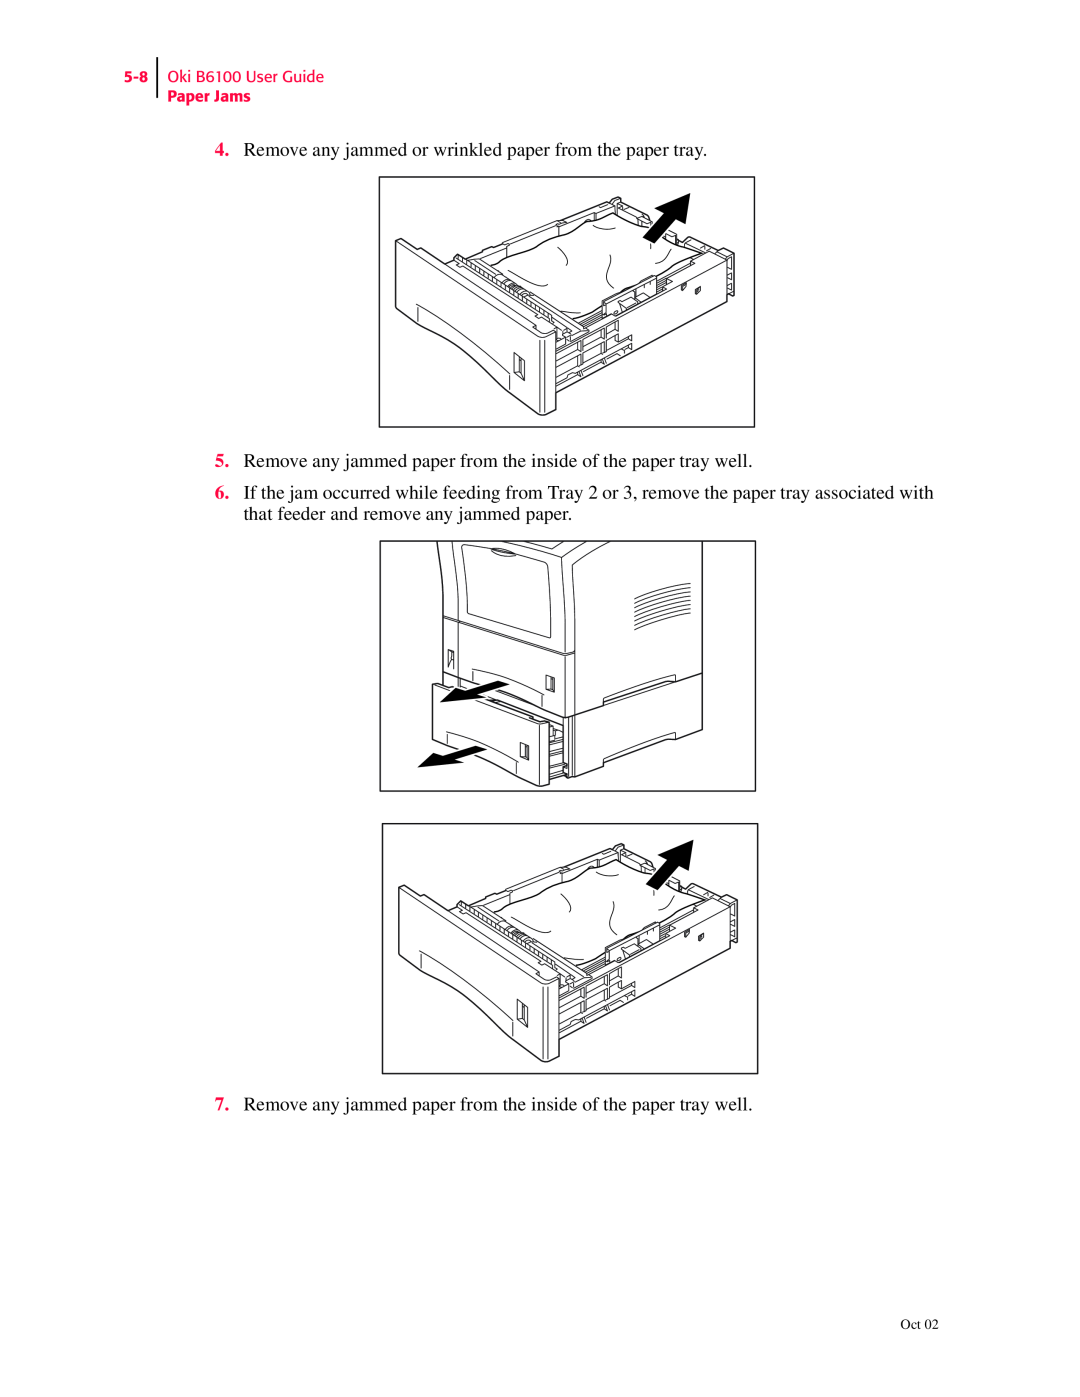 Oki manual Remove any jammed or wrinkled paper from the paper tray, Oki B6100 User Guide Paper Jams 